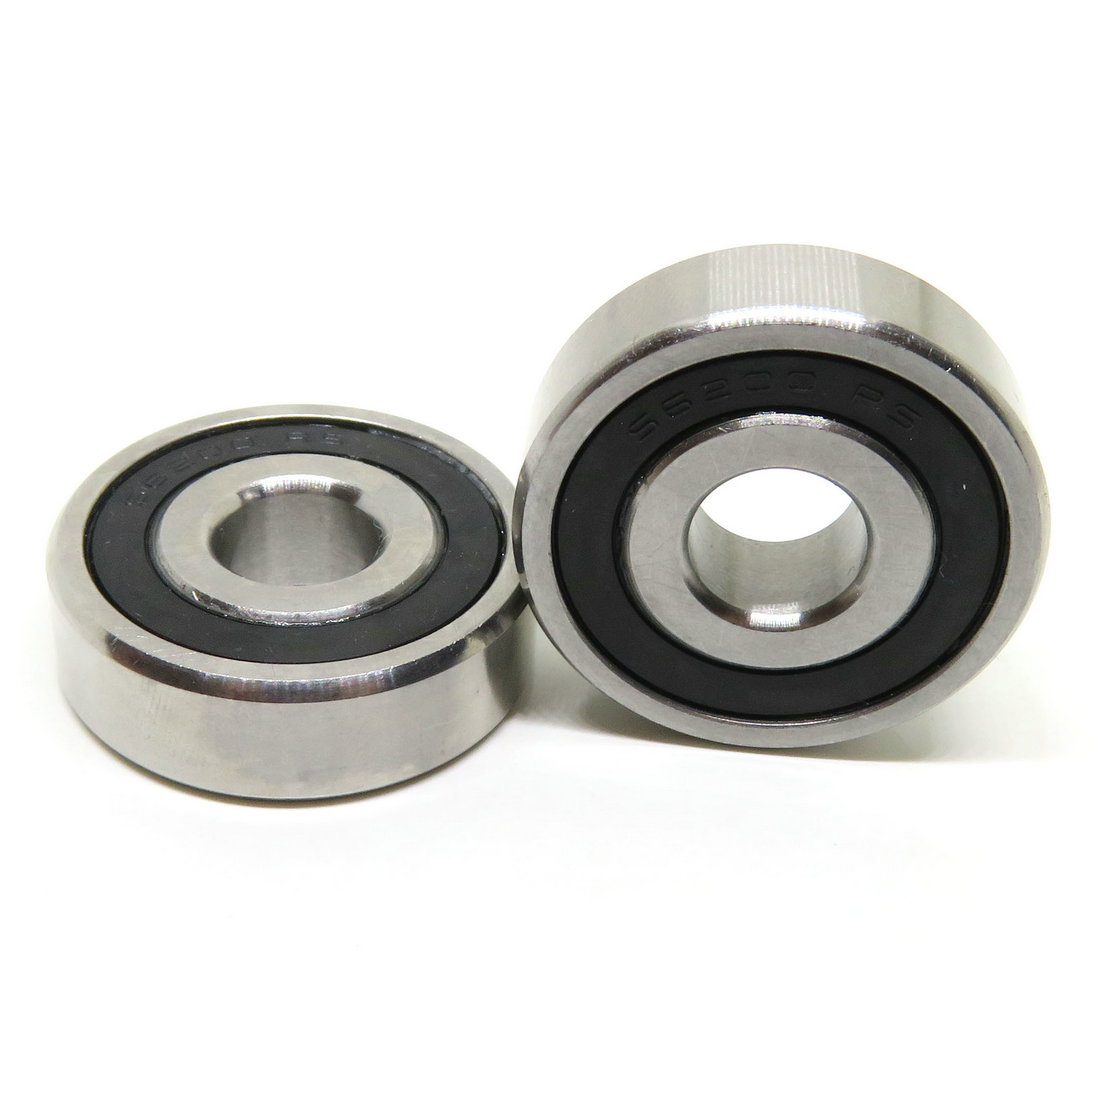 Good Corrosion Resistance Water S6300RS Bearing 10x35x11mm 440C Stainless Steel Ball Bearing S6300 2RS.jpg